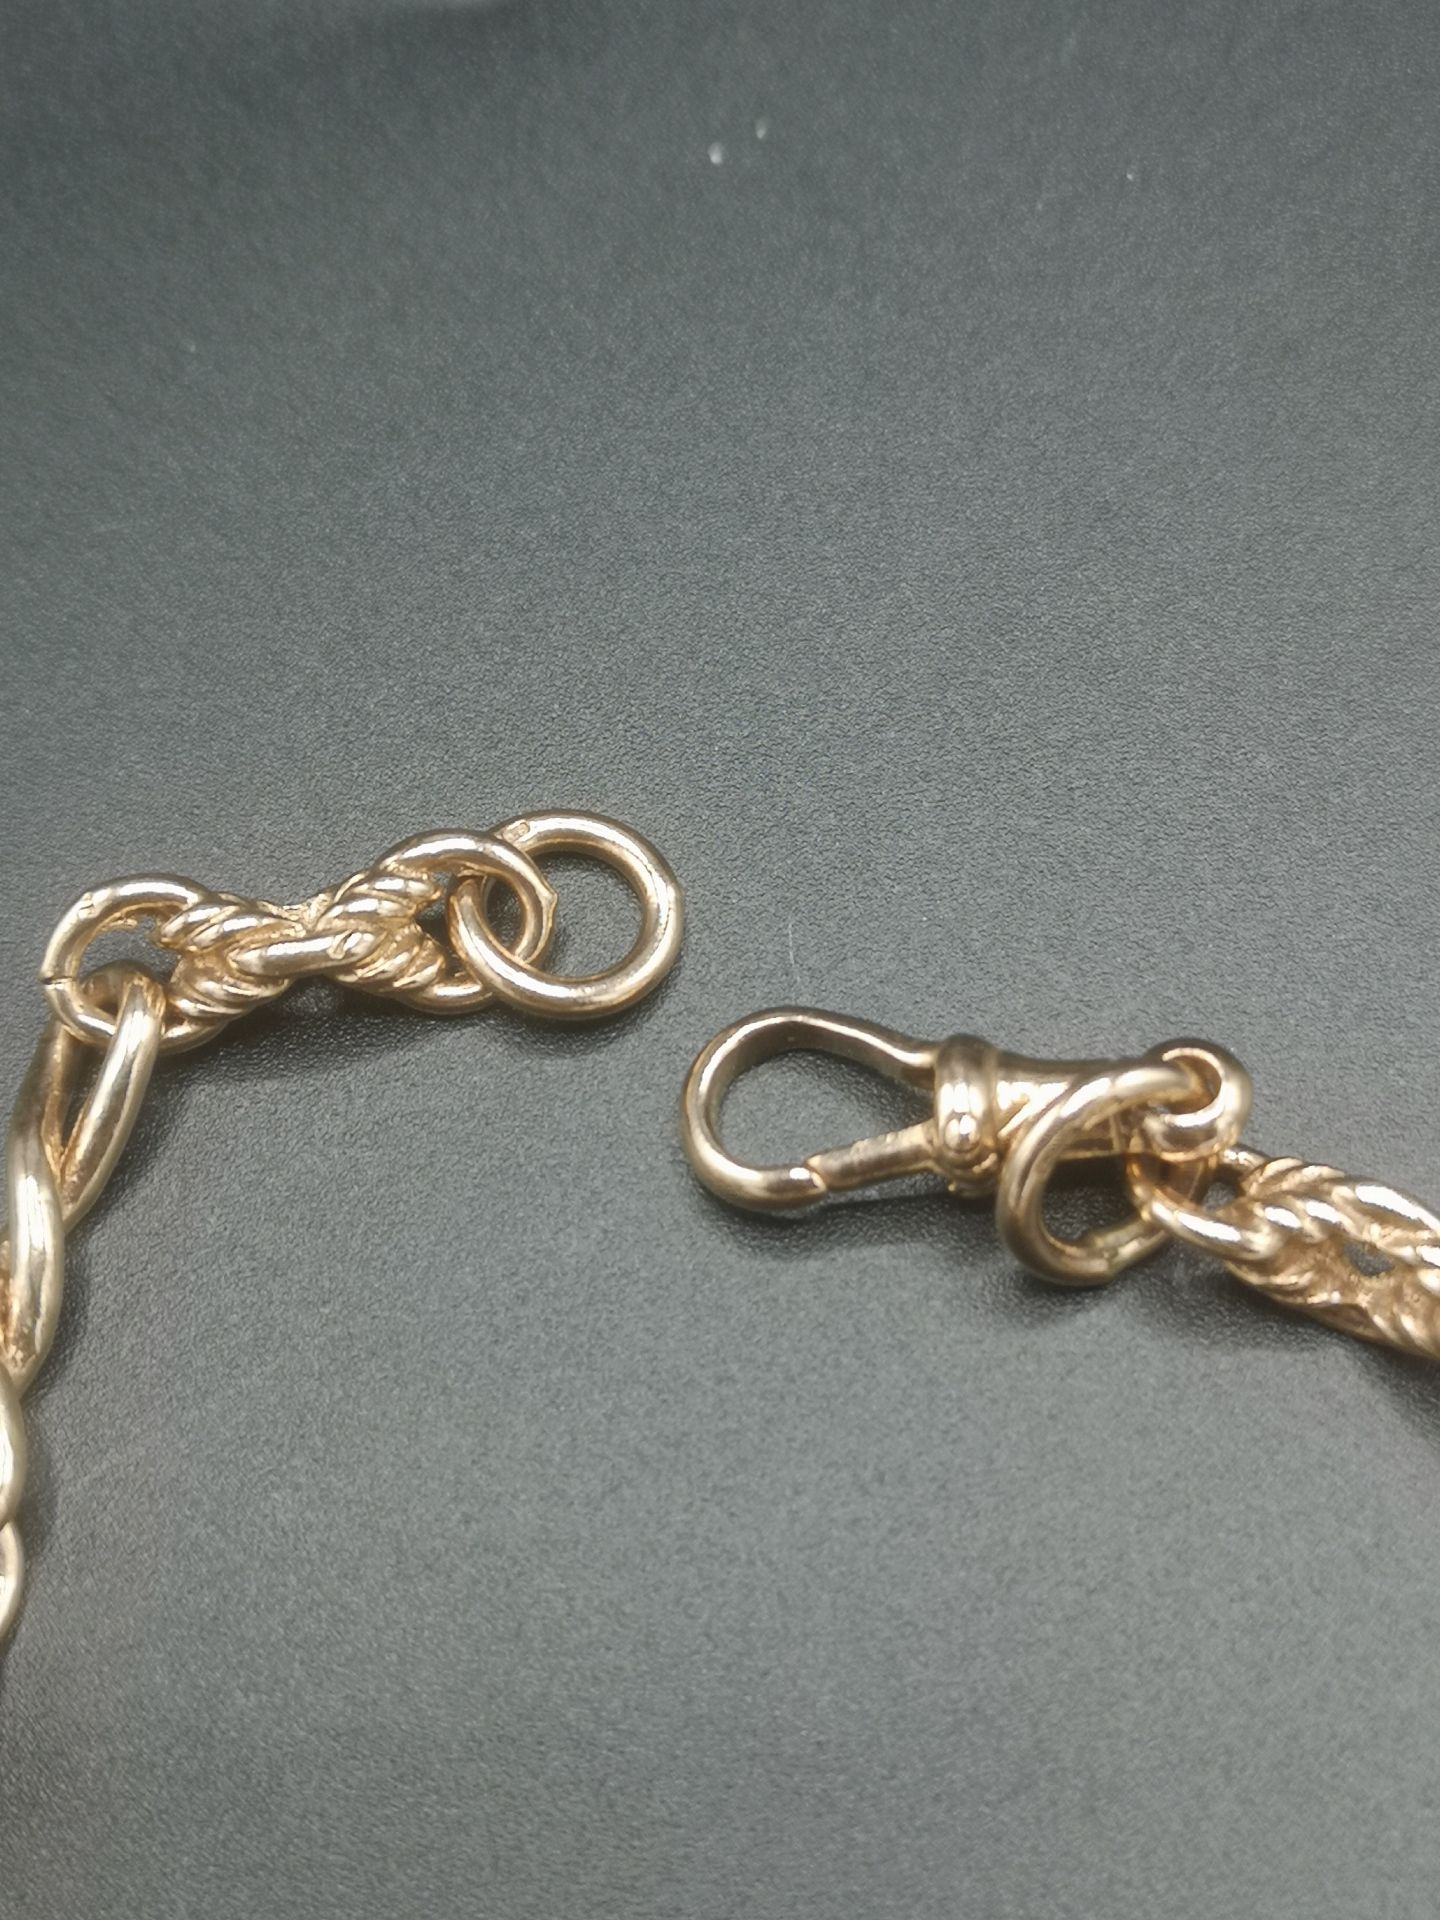 9ct rose gold watch chain - Image 2 of 3